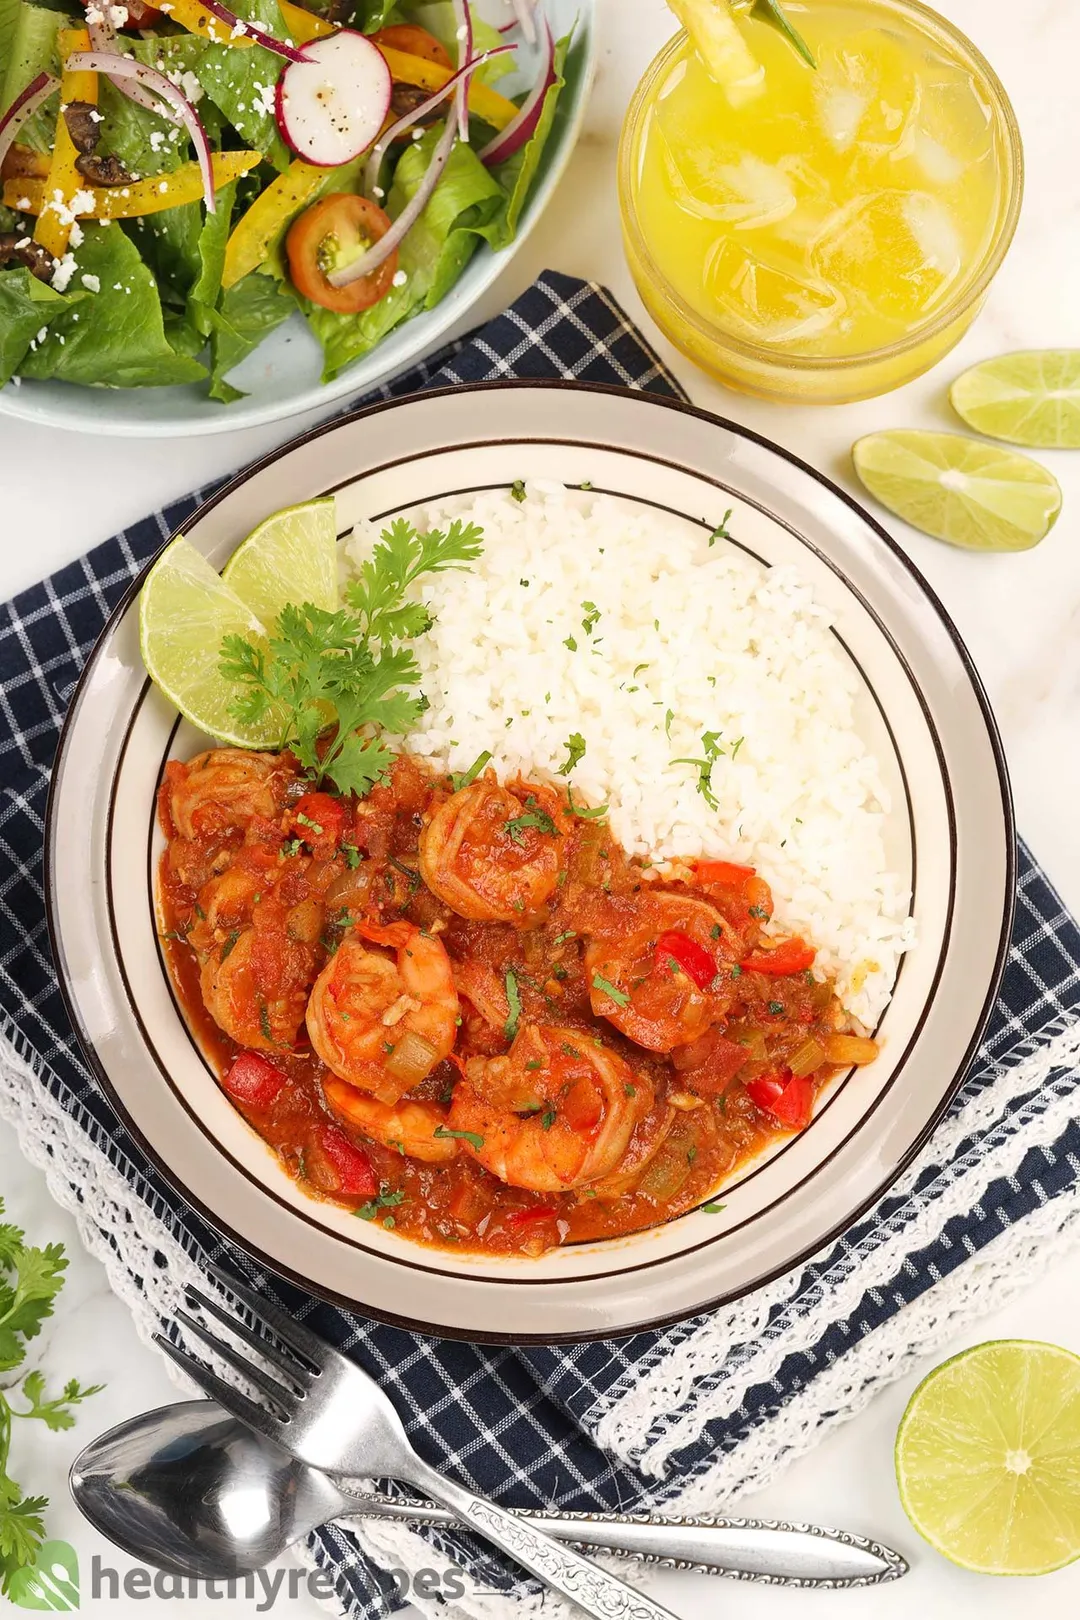 What to Serve With Shrimp Creole